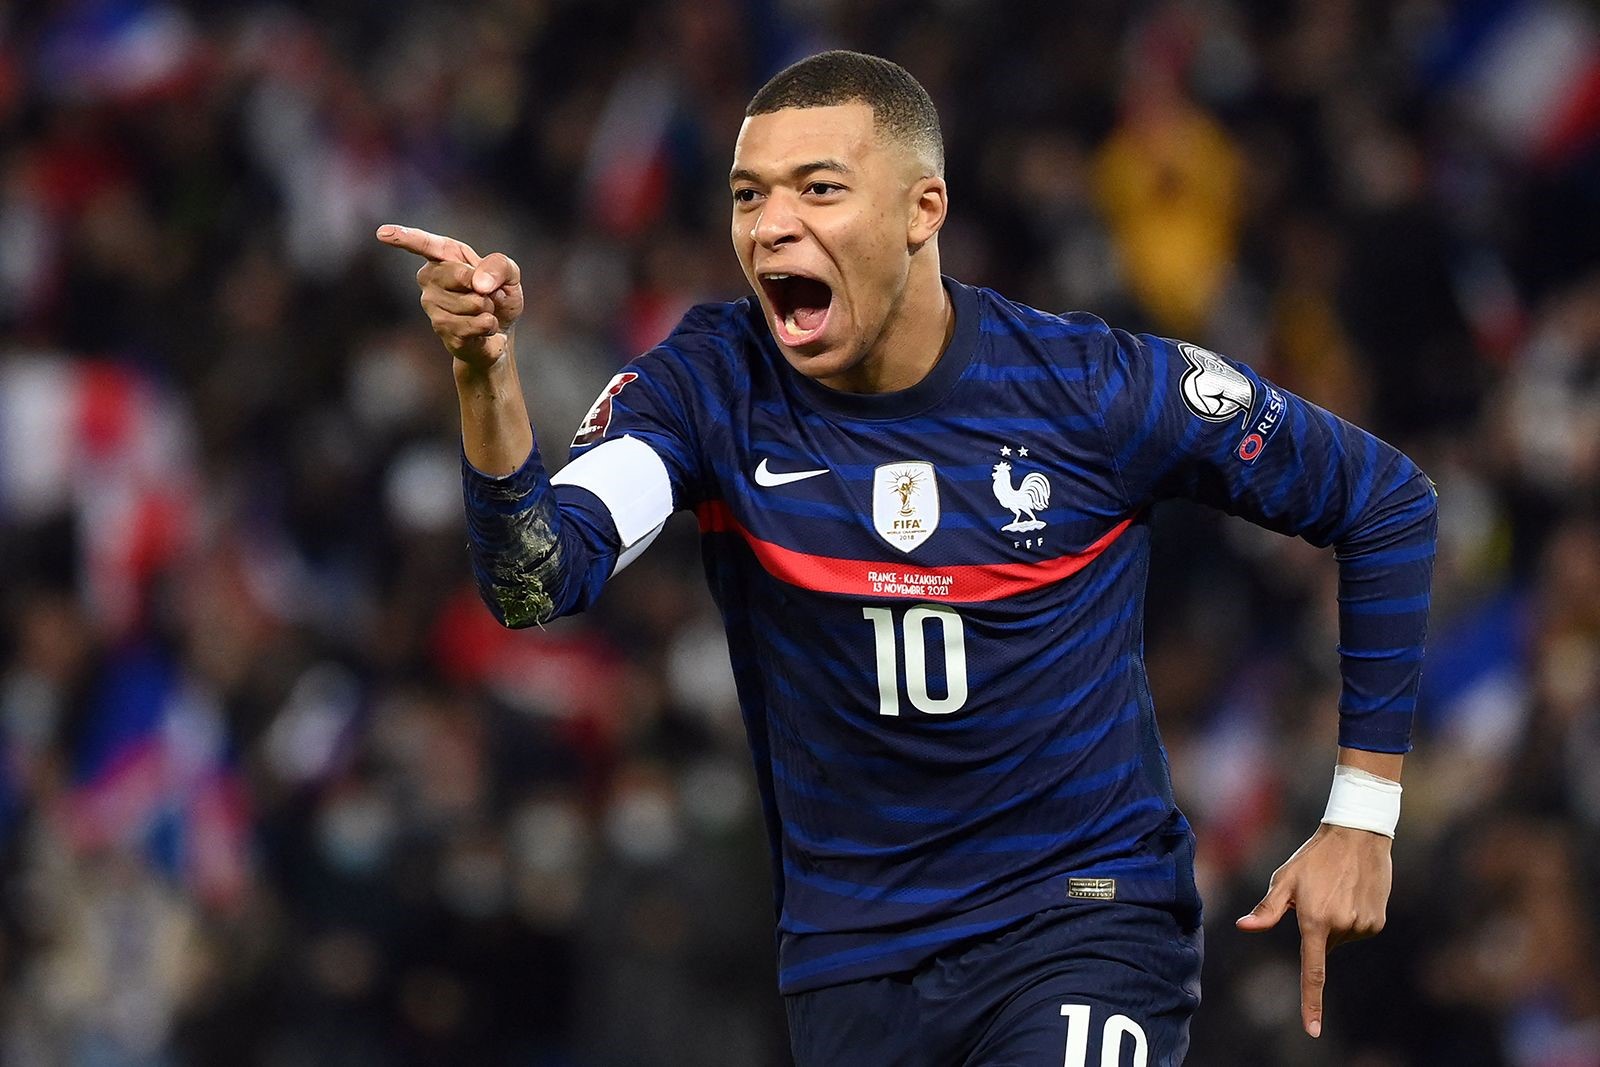 Kylian Mbappe World Cup's performance in the opening stages of the match